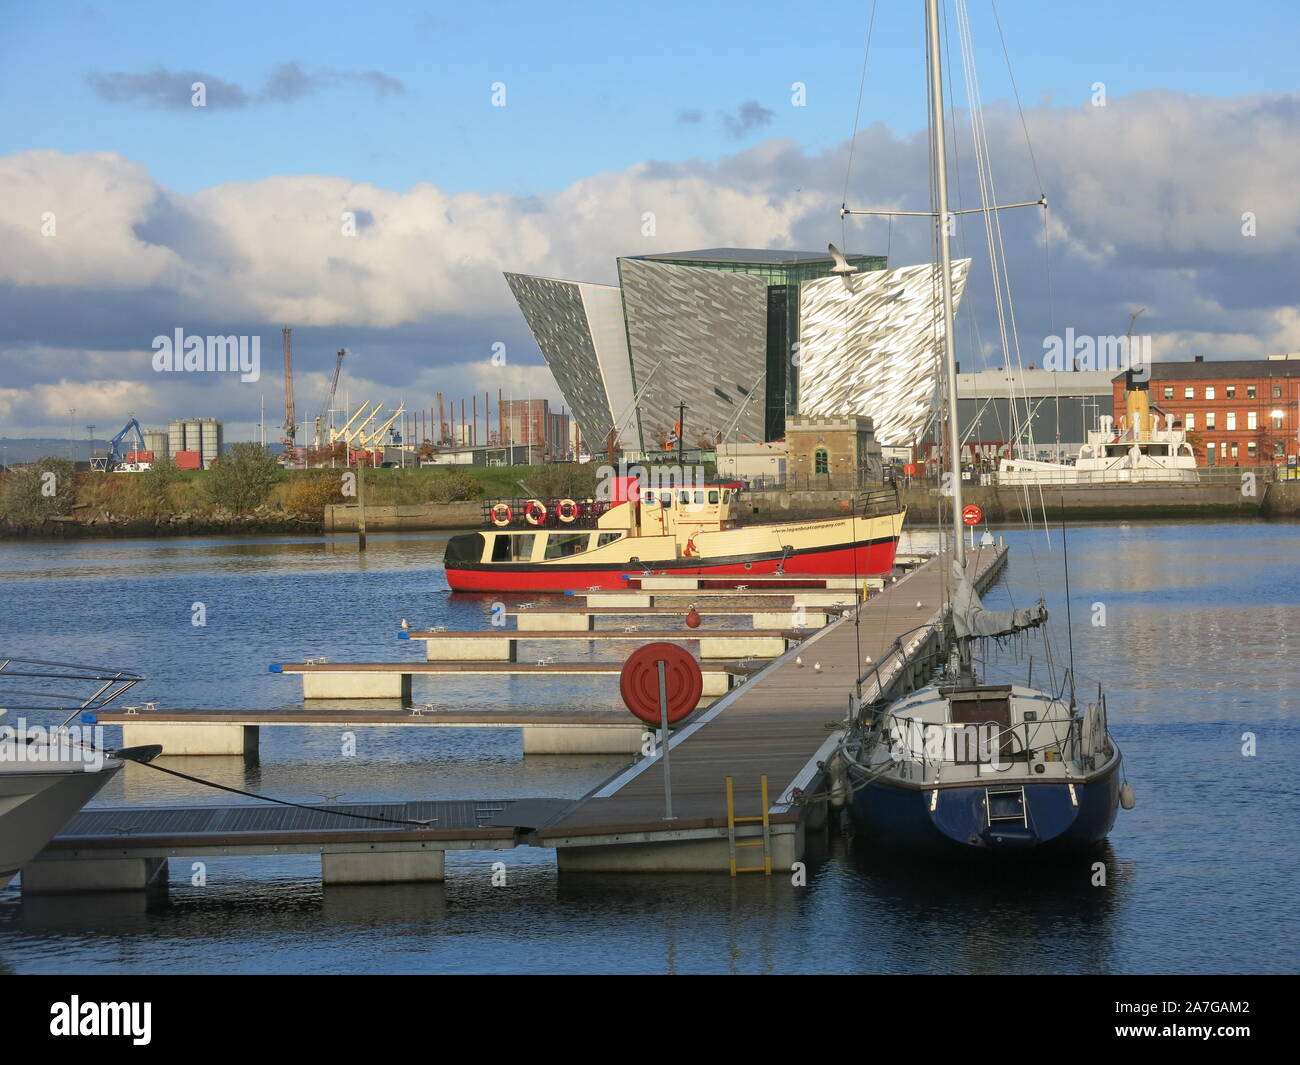 View of boats moored by a jetty in the regenerated waterfront Titanic Quarter in central Belfast, the Titanic Museum in the background. Stock Photo